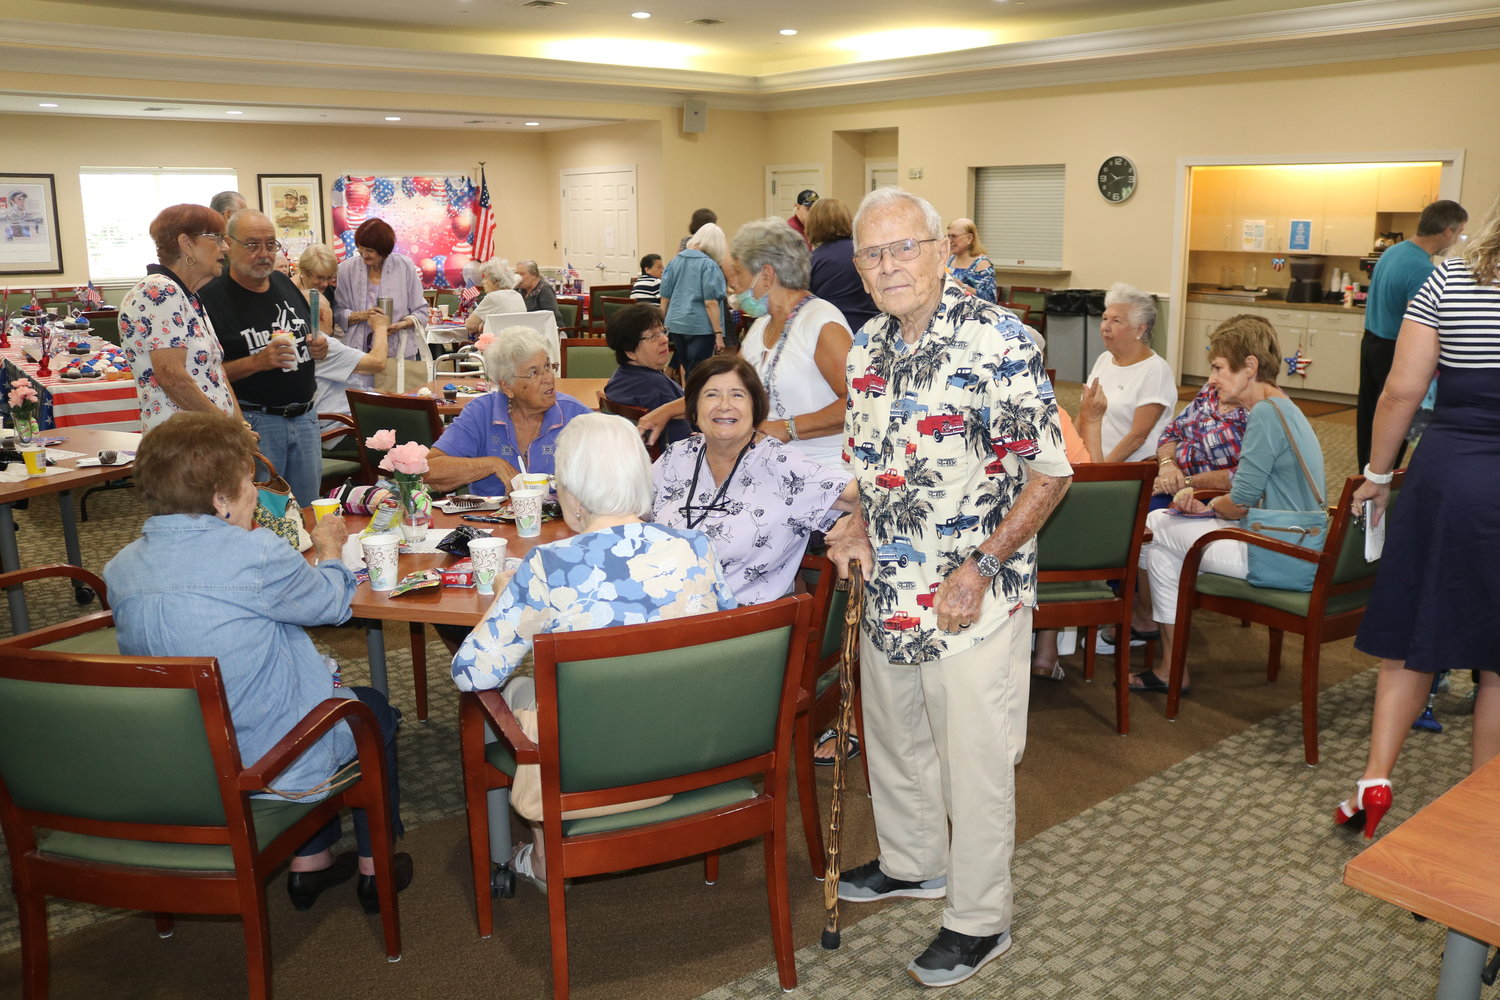 Area seniors gathered June 24 for a ‘welcome home’ party at THE PLAYERS Community Senior Center, which had been closed over the past year to protect people from the pandemic.